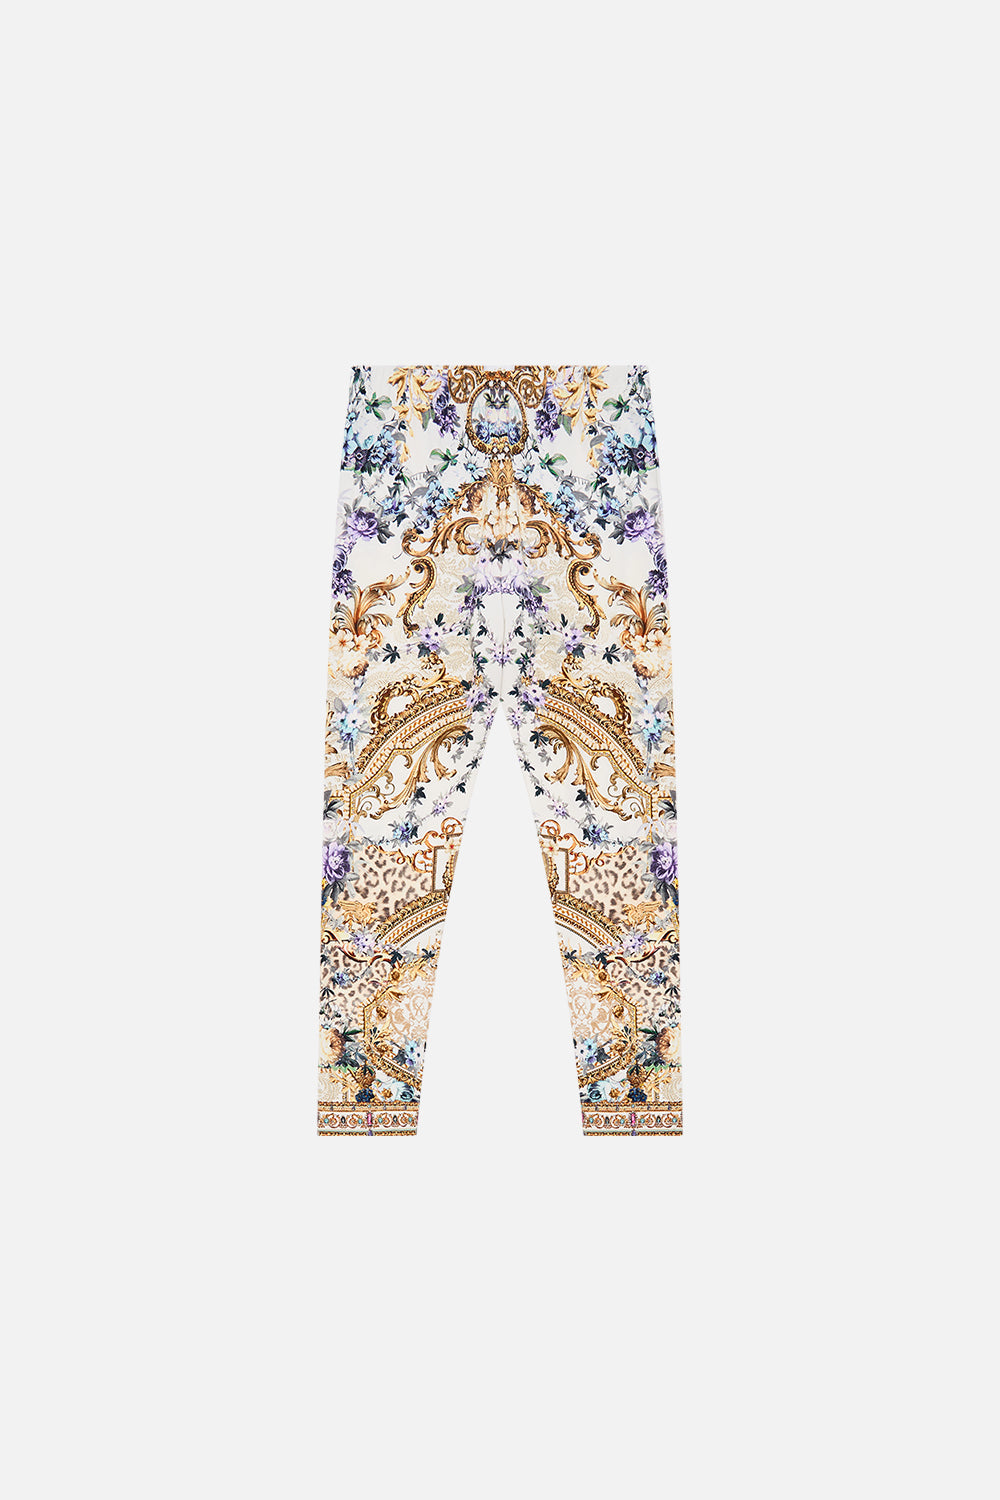 Product view of Milla By CAMILLA kids leggings in Palazzo playdate print 